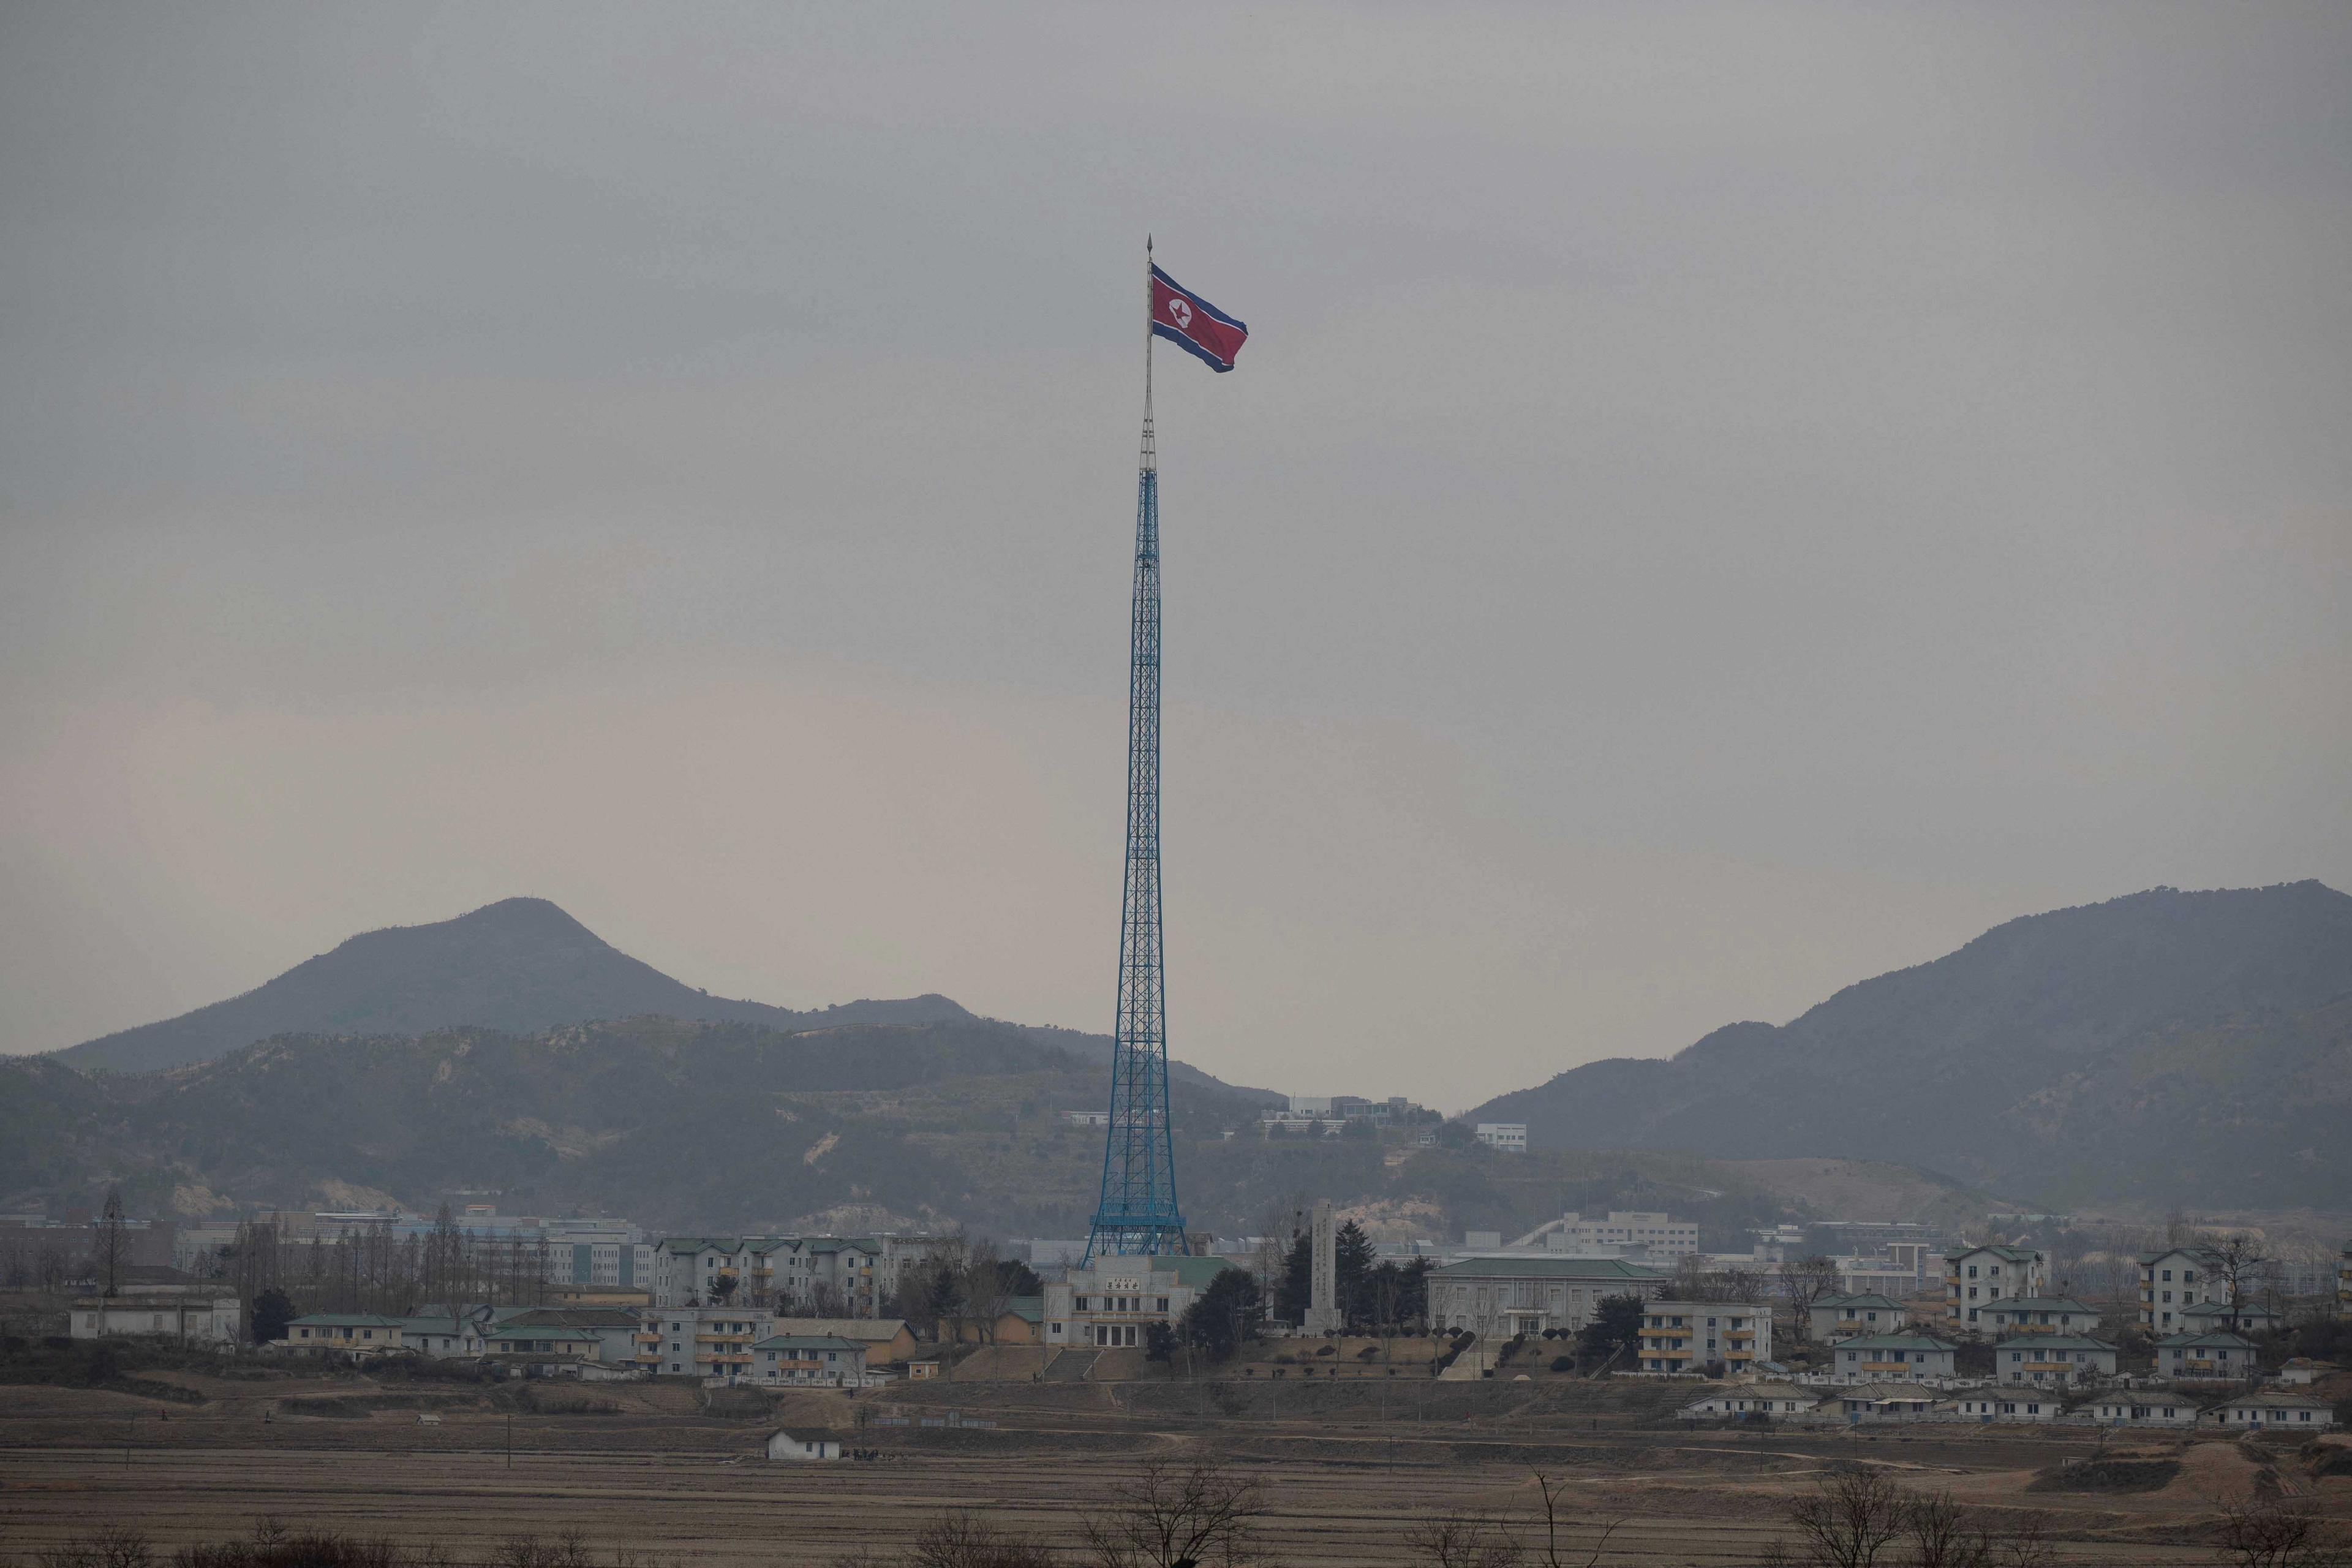 North Korean propaganda village 'Gijungdong' is seen from an South Korea's observation post inside the JSA during a media tour at the Joint Security Area (JSA) on the Demilitarized Zone (DMZ) in the border village of Panmunjom in Paju, South Korea, 3 March. Photo: Reuters